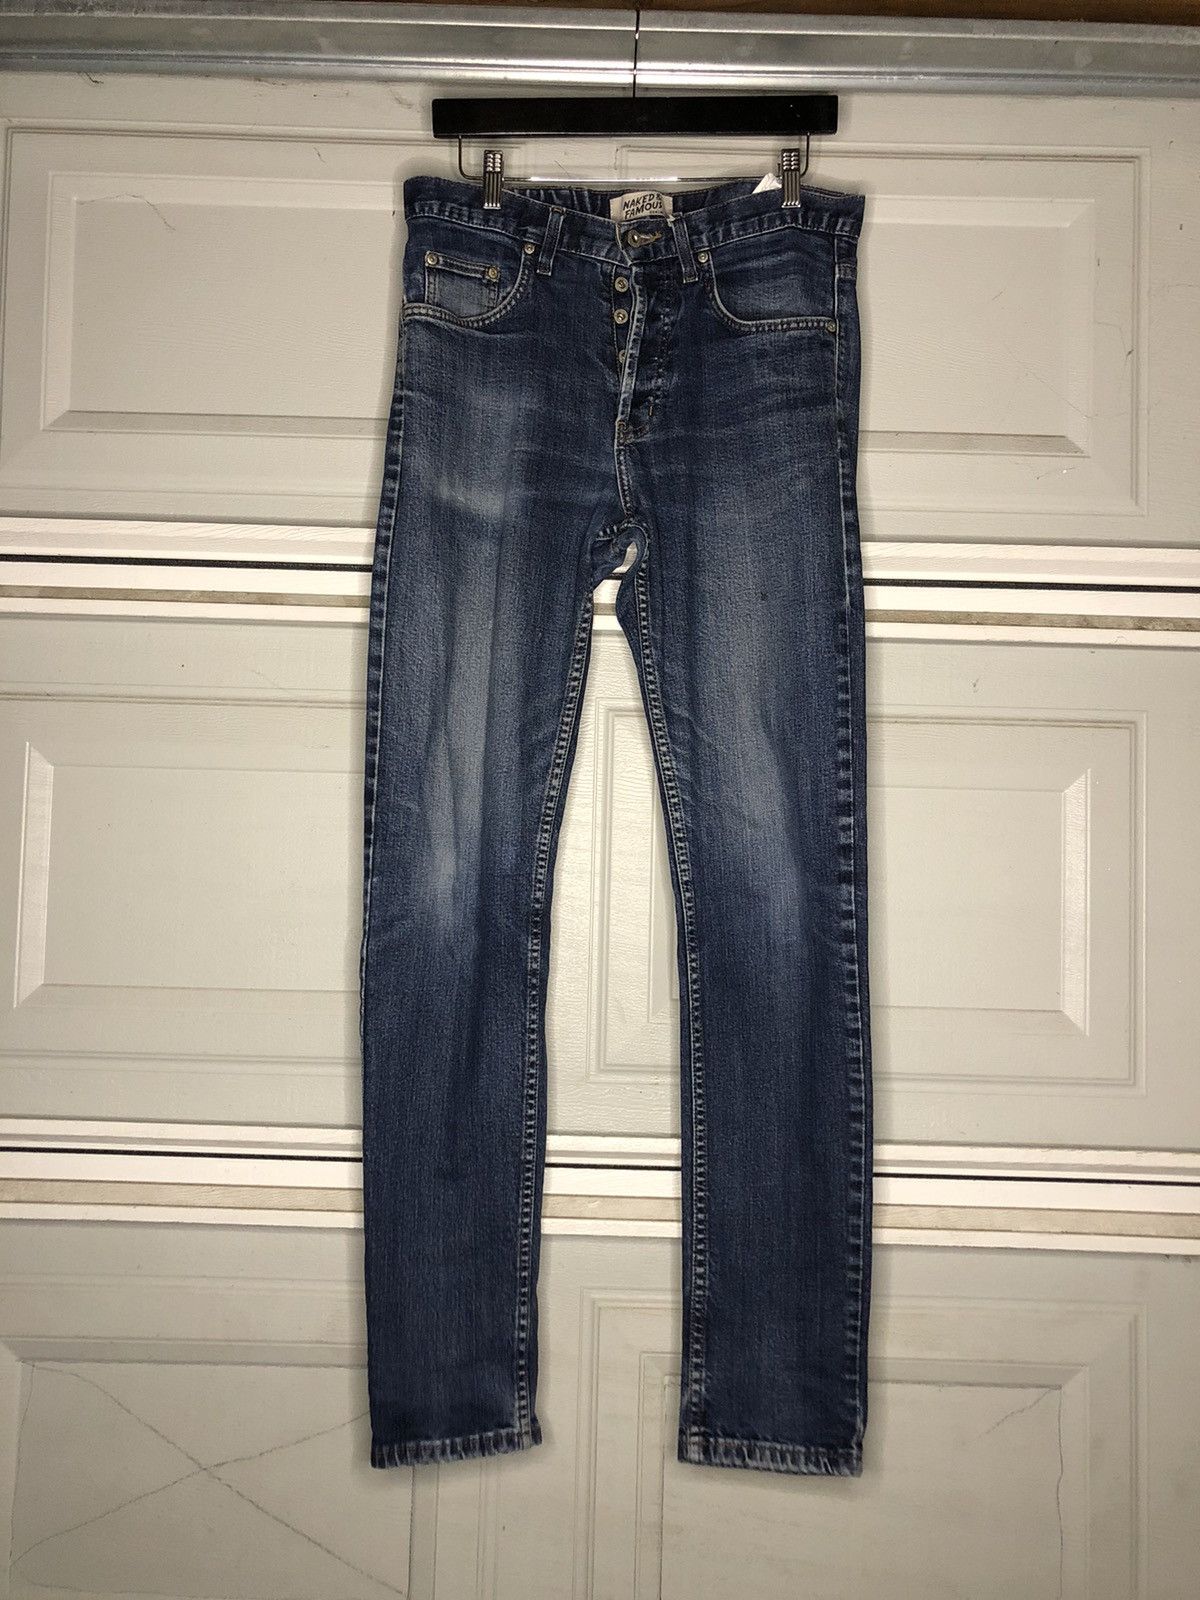 Vintage Naked and famous Raw Salvage Denim | Grailed